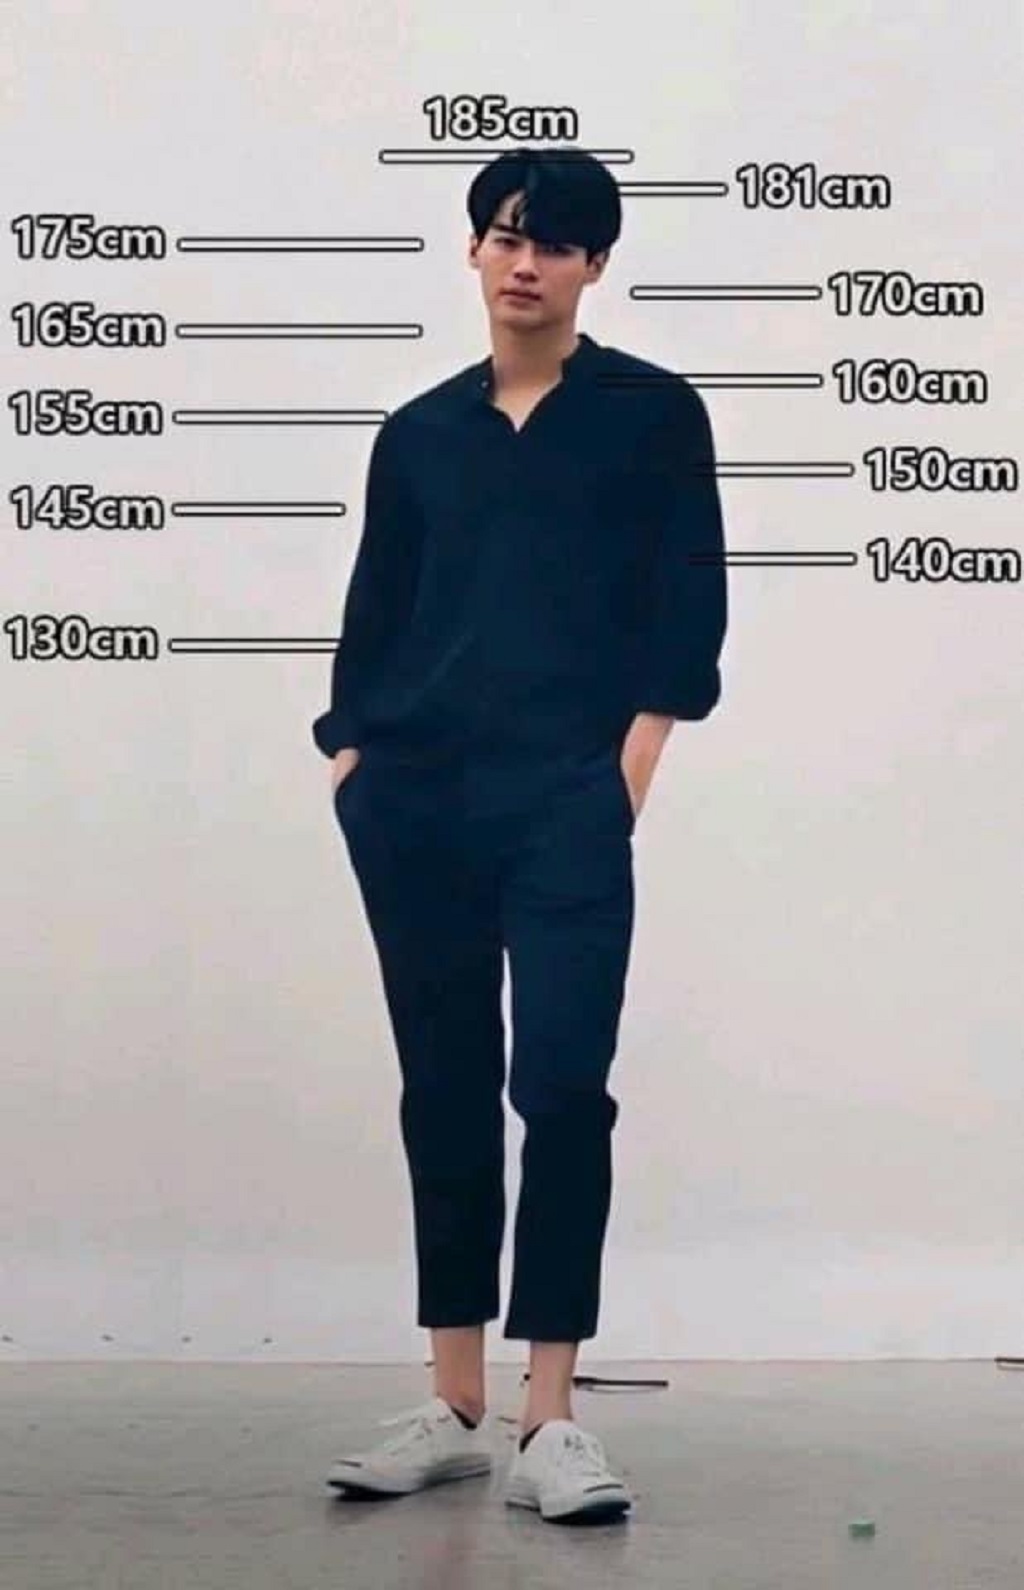 Is 170 cm Too Short for a Guy?